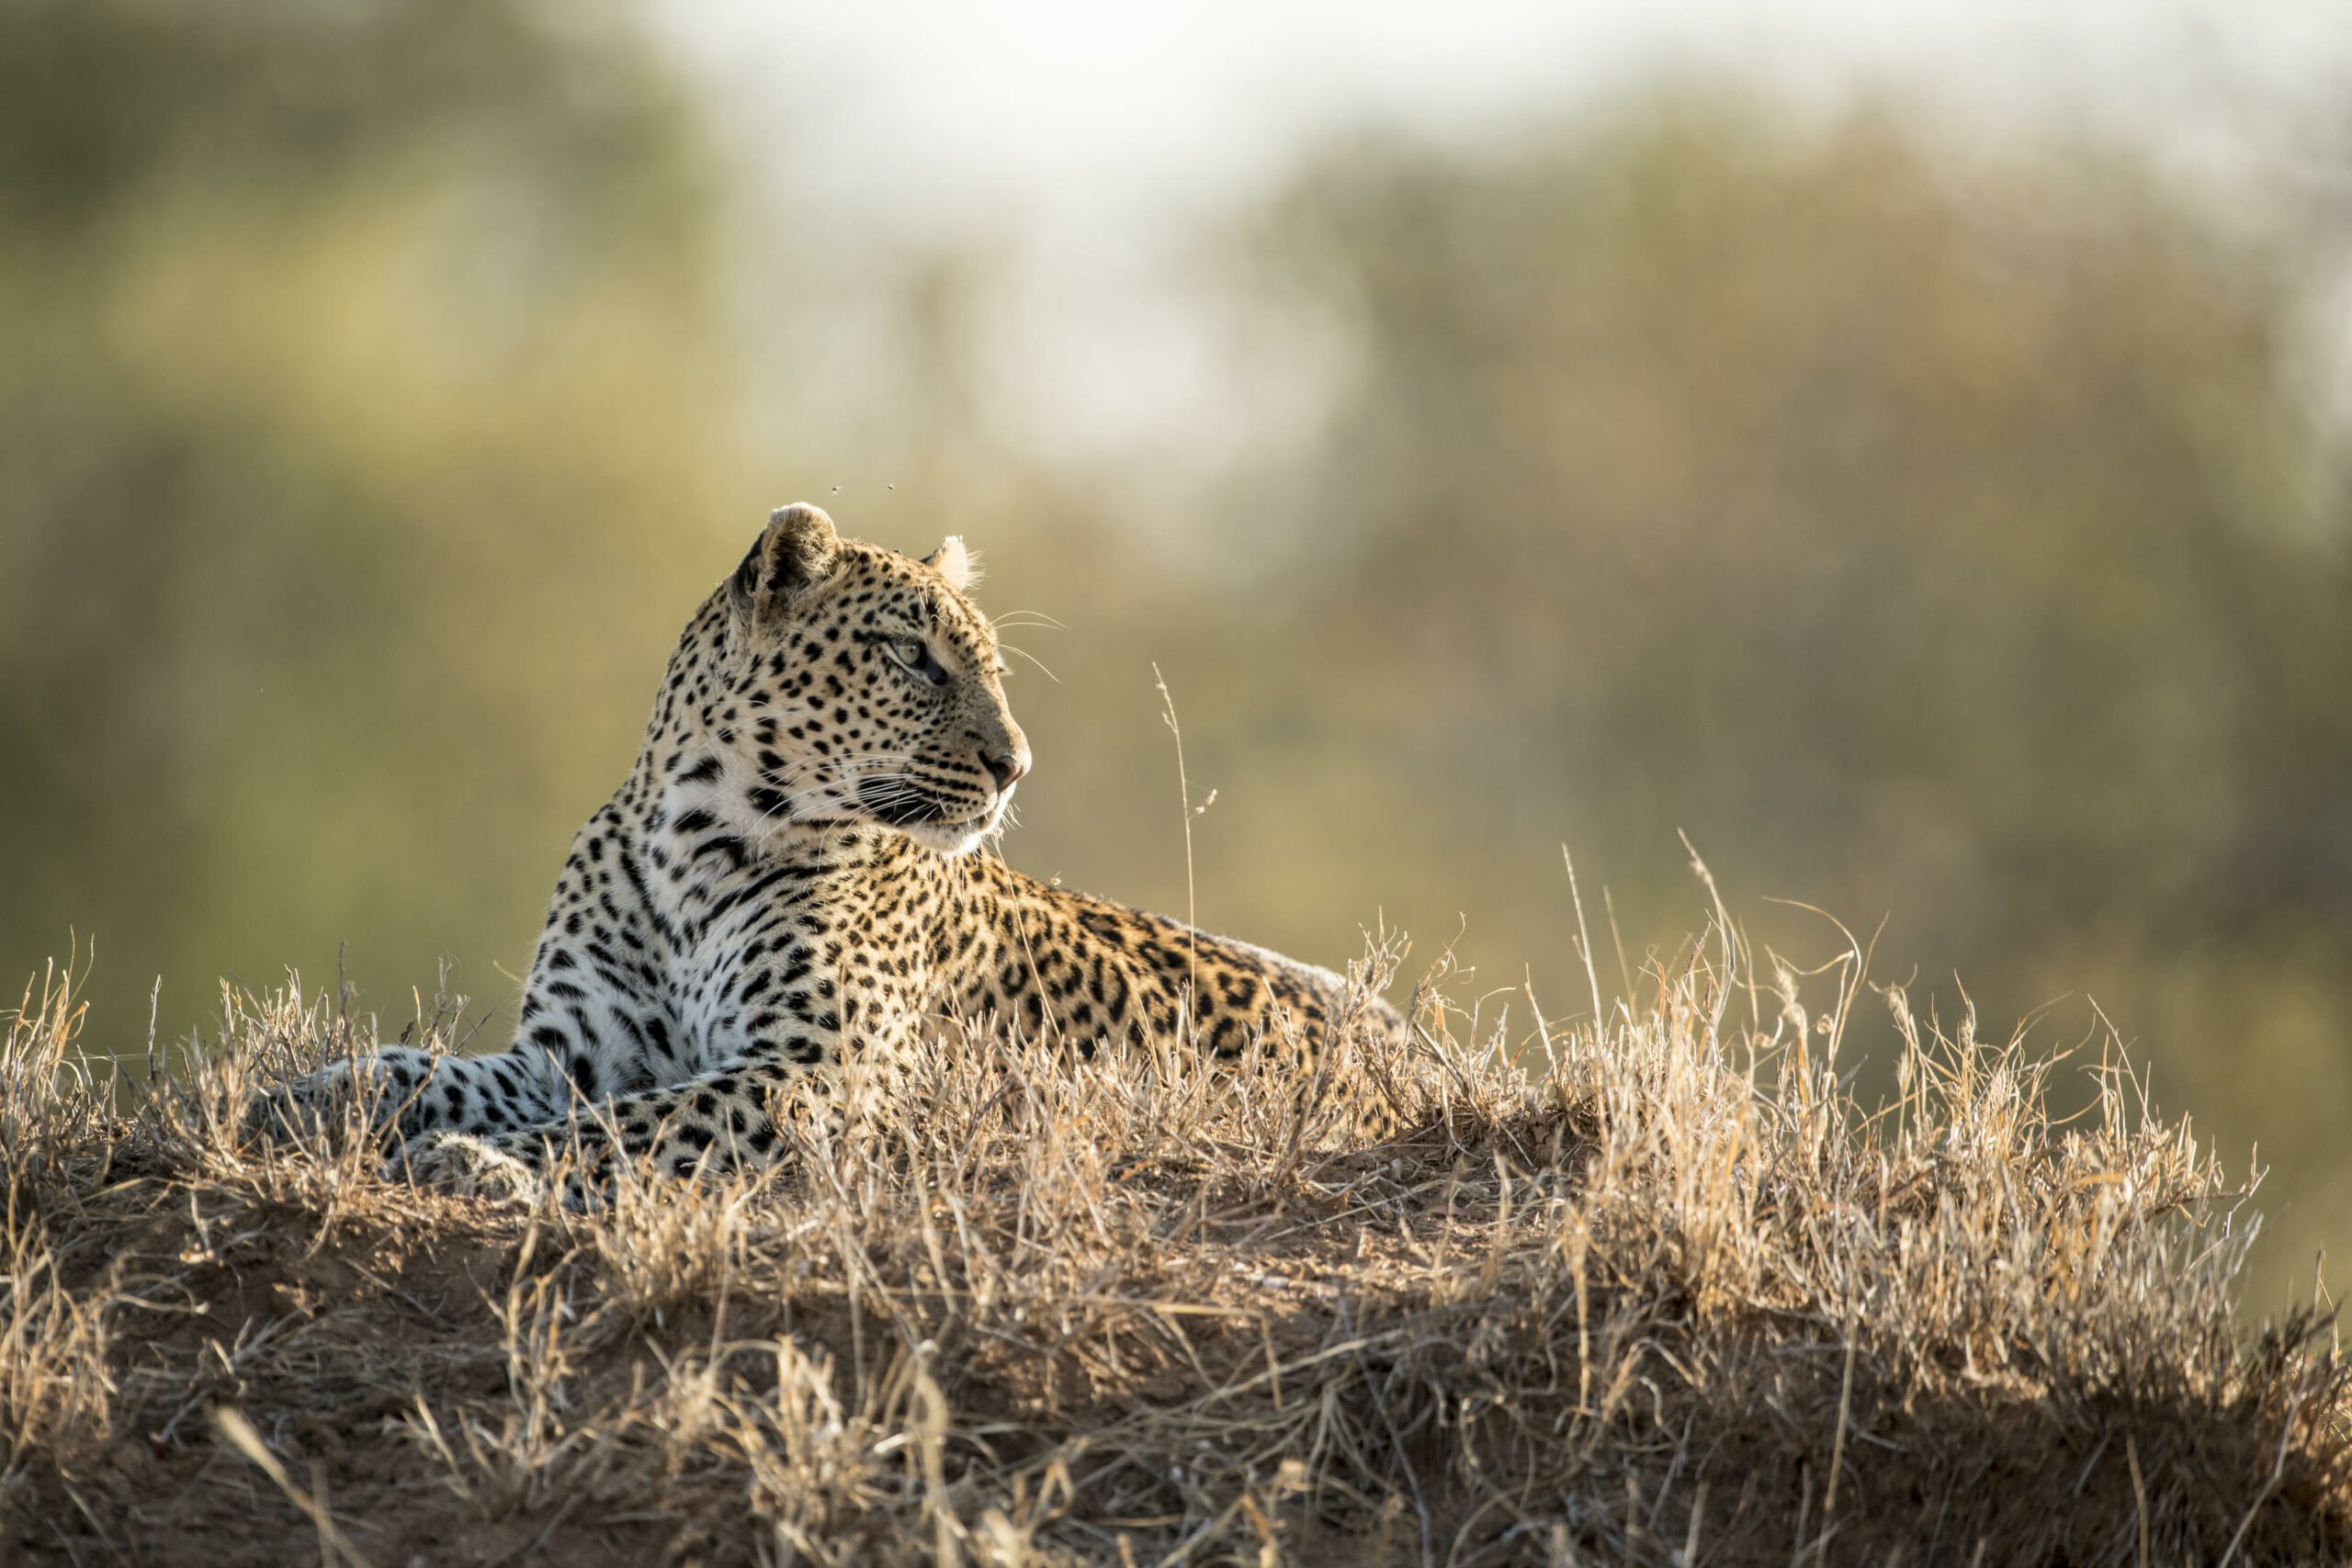 A leopard laying down in a field of dry grass.